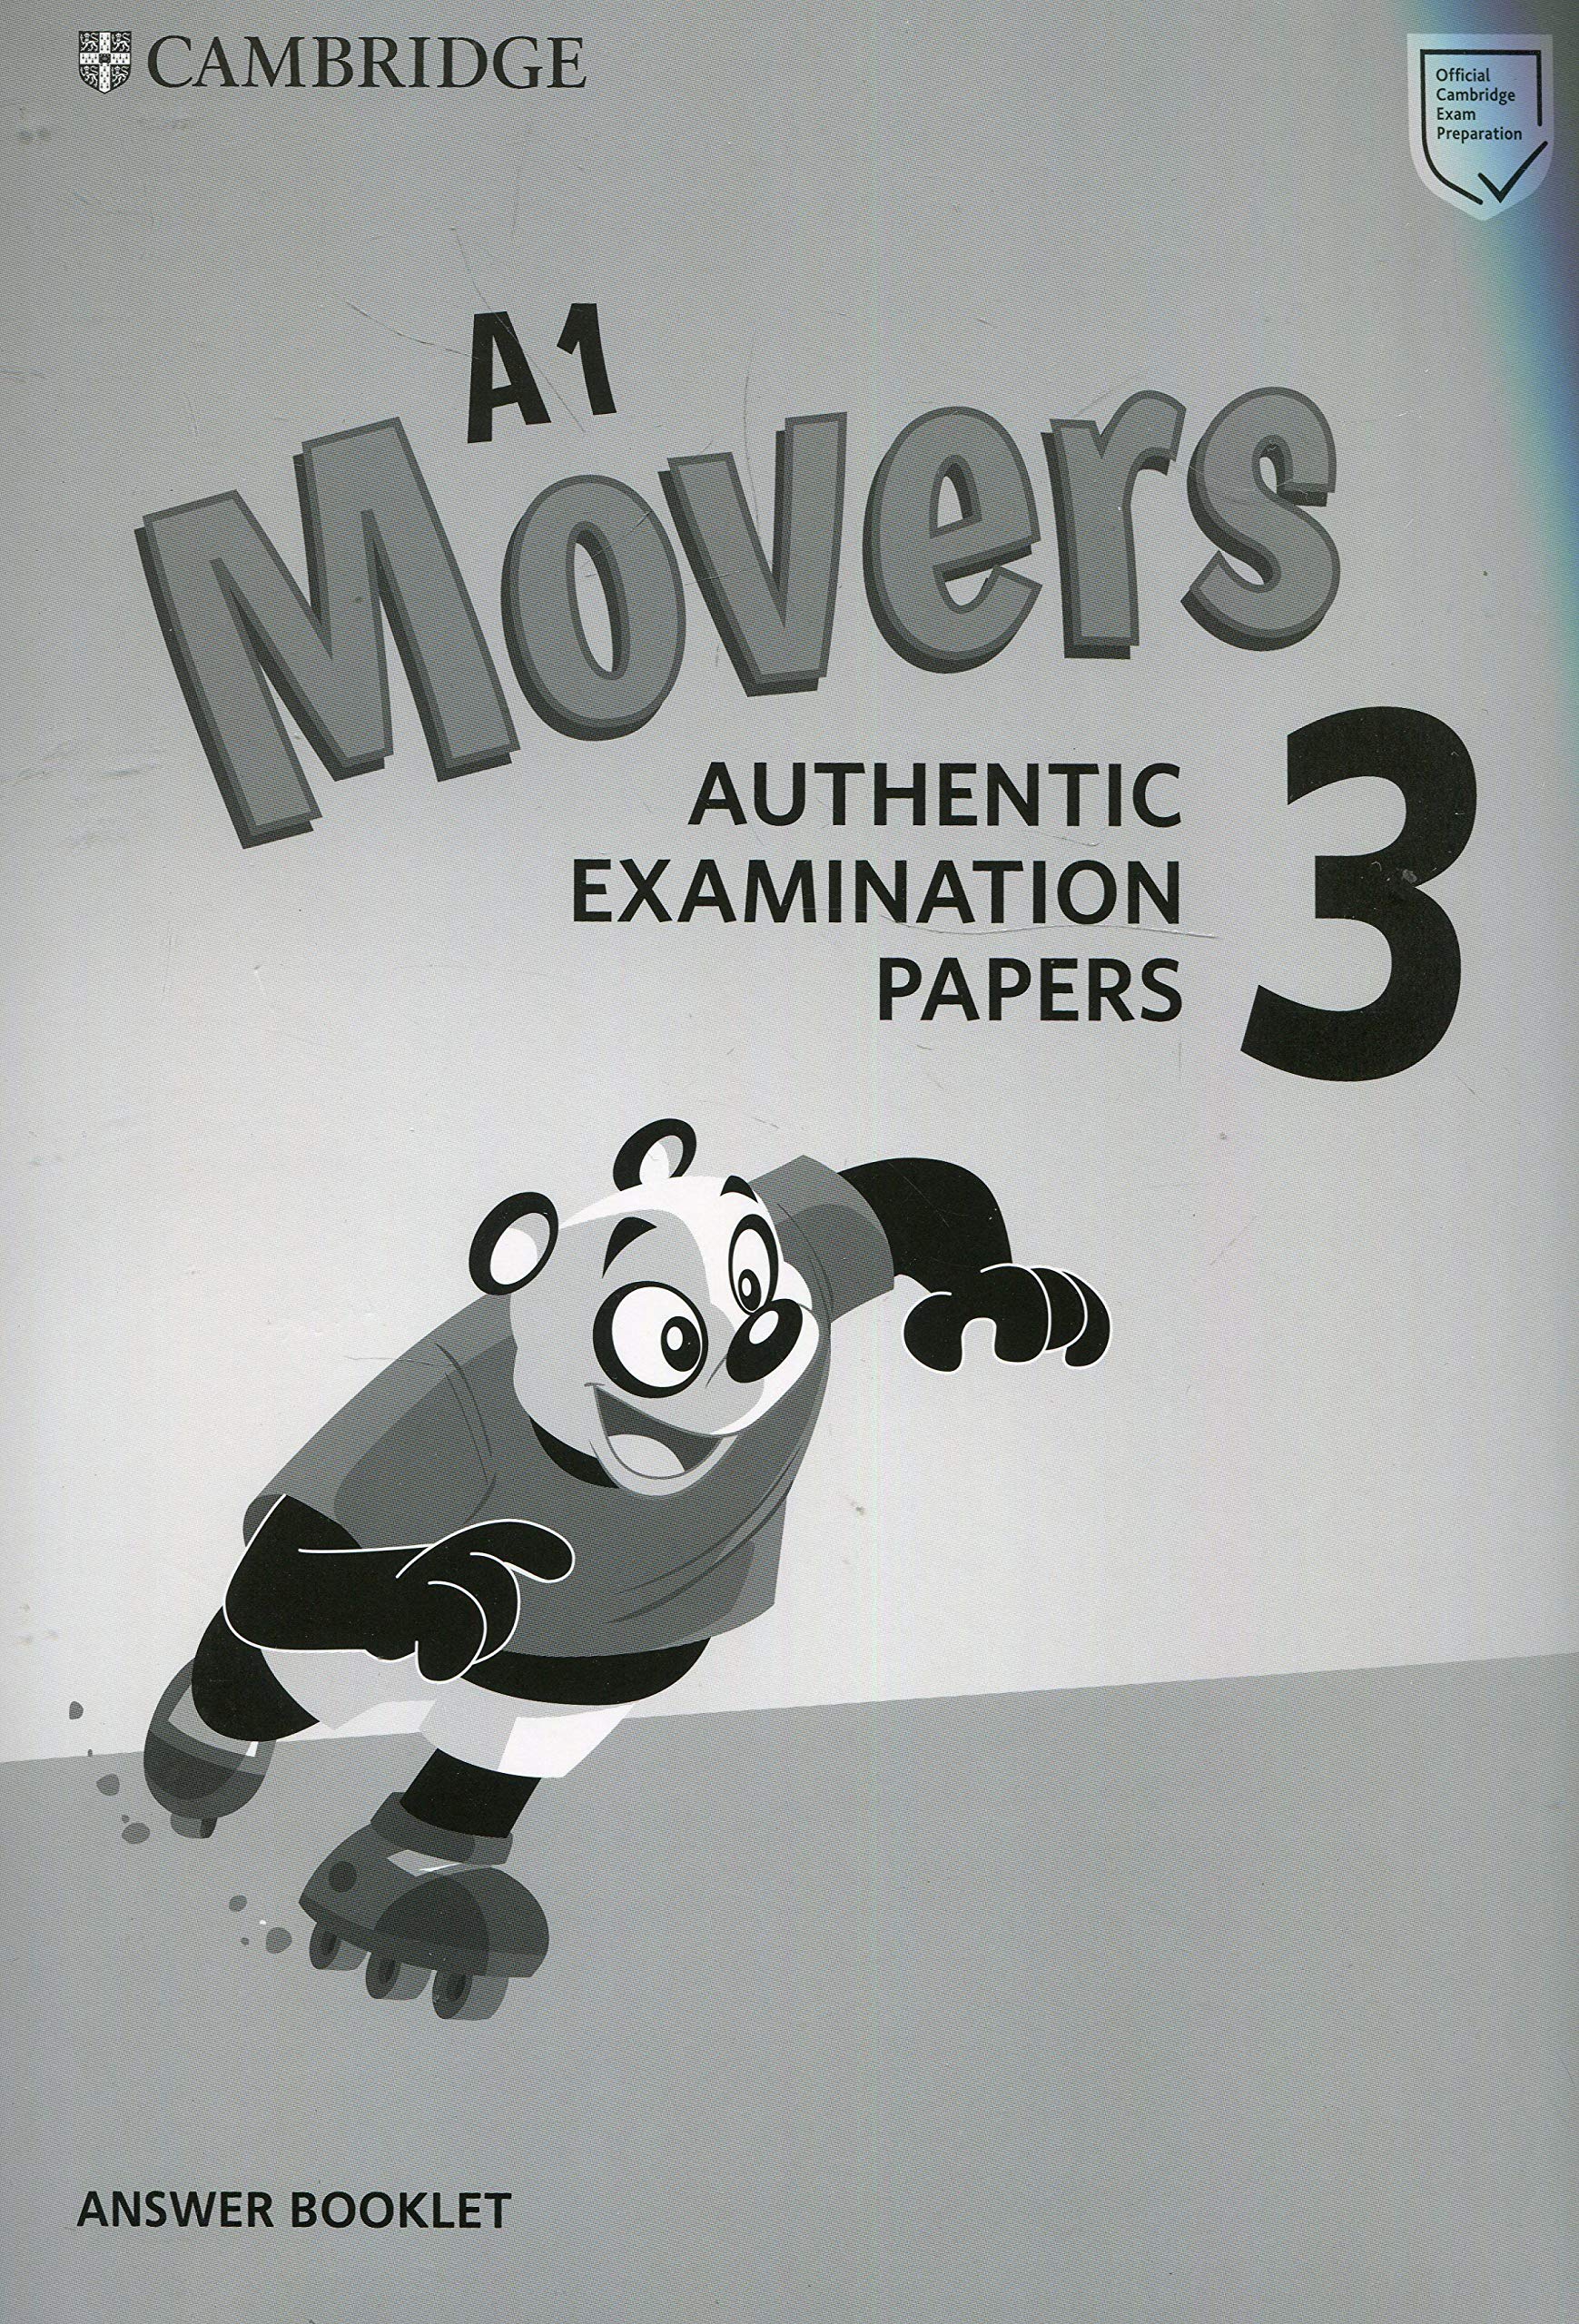 A1 Movers 3 Answer Booklet: Authentic Examination Papers |